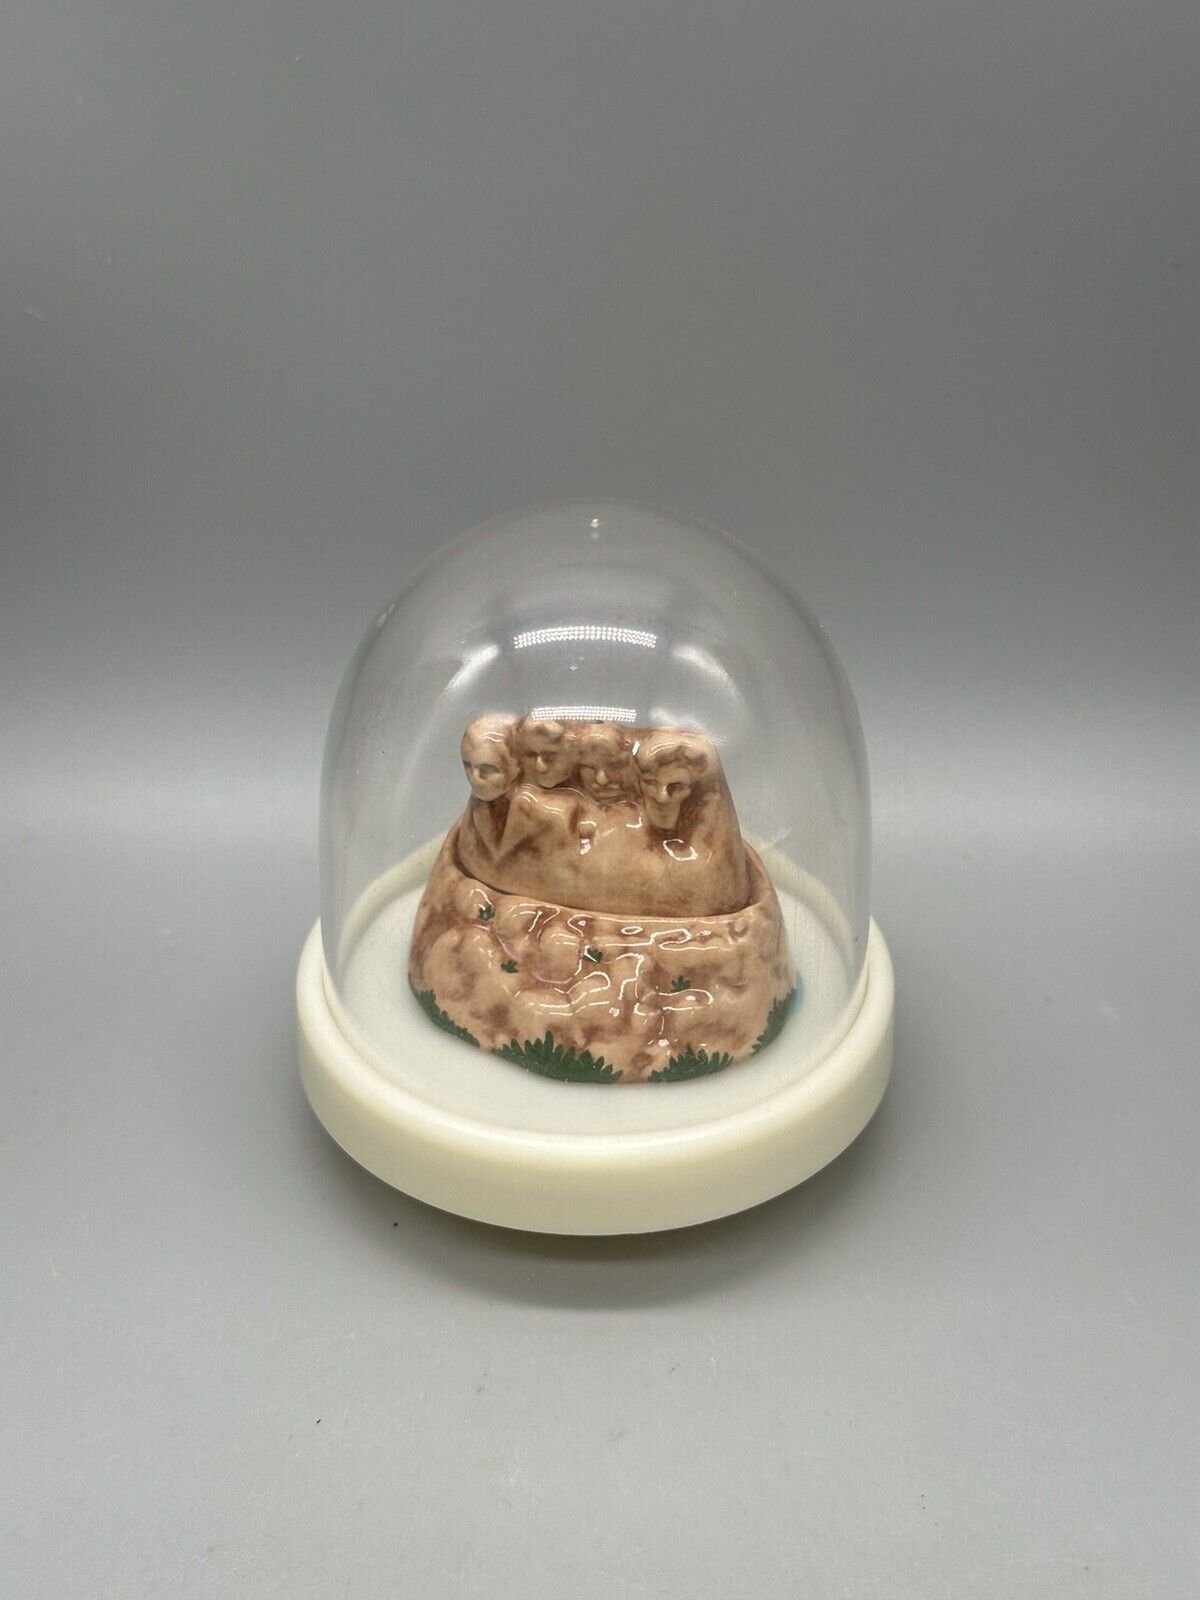 Sandy SRP Miniature Salt And Pepper shakers Mount Rushmore And With Dome